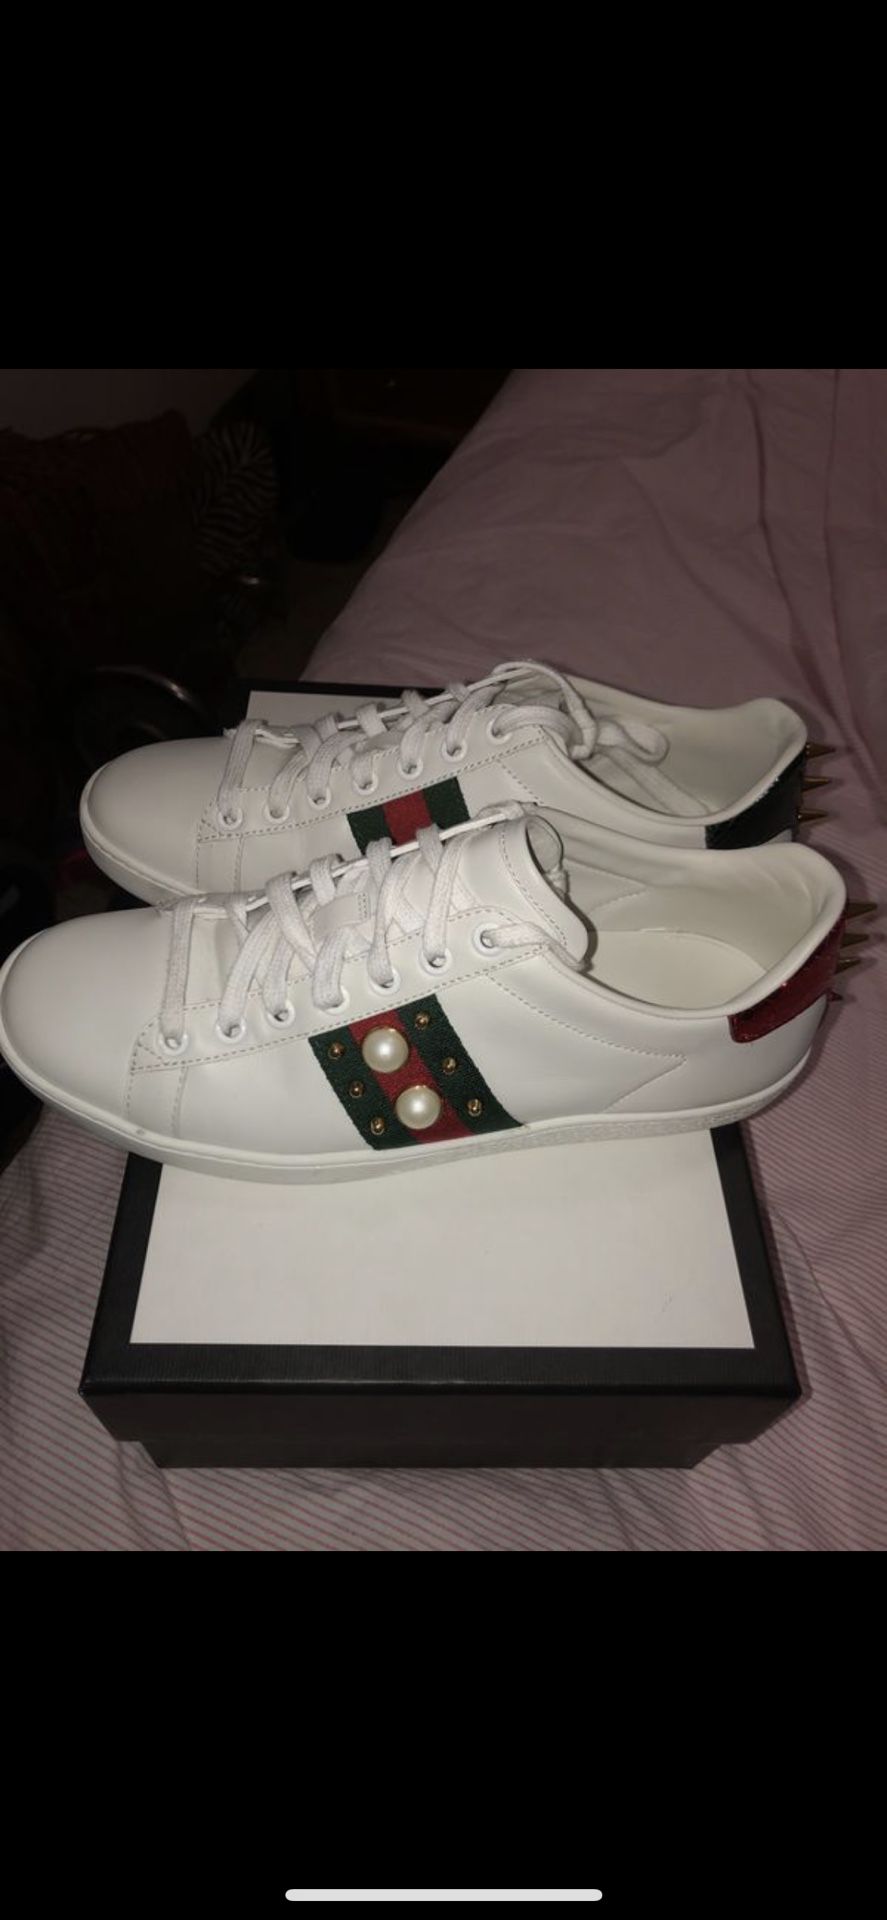 Authentic women’s Gucci sneakers